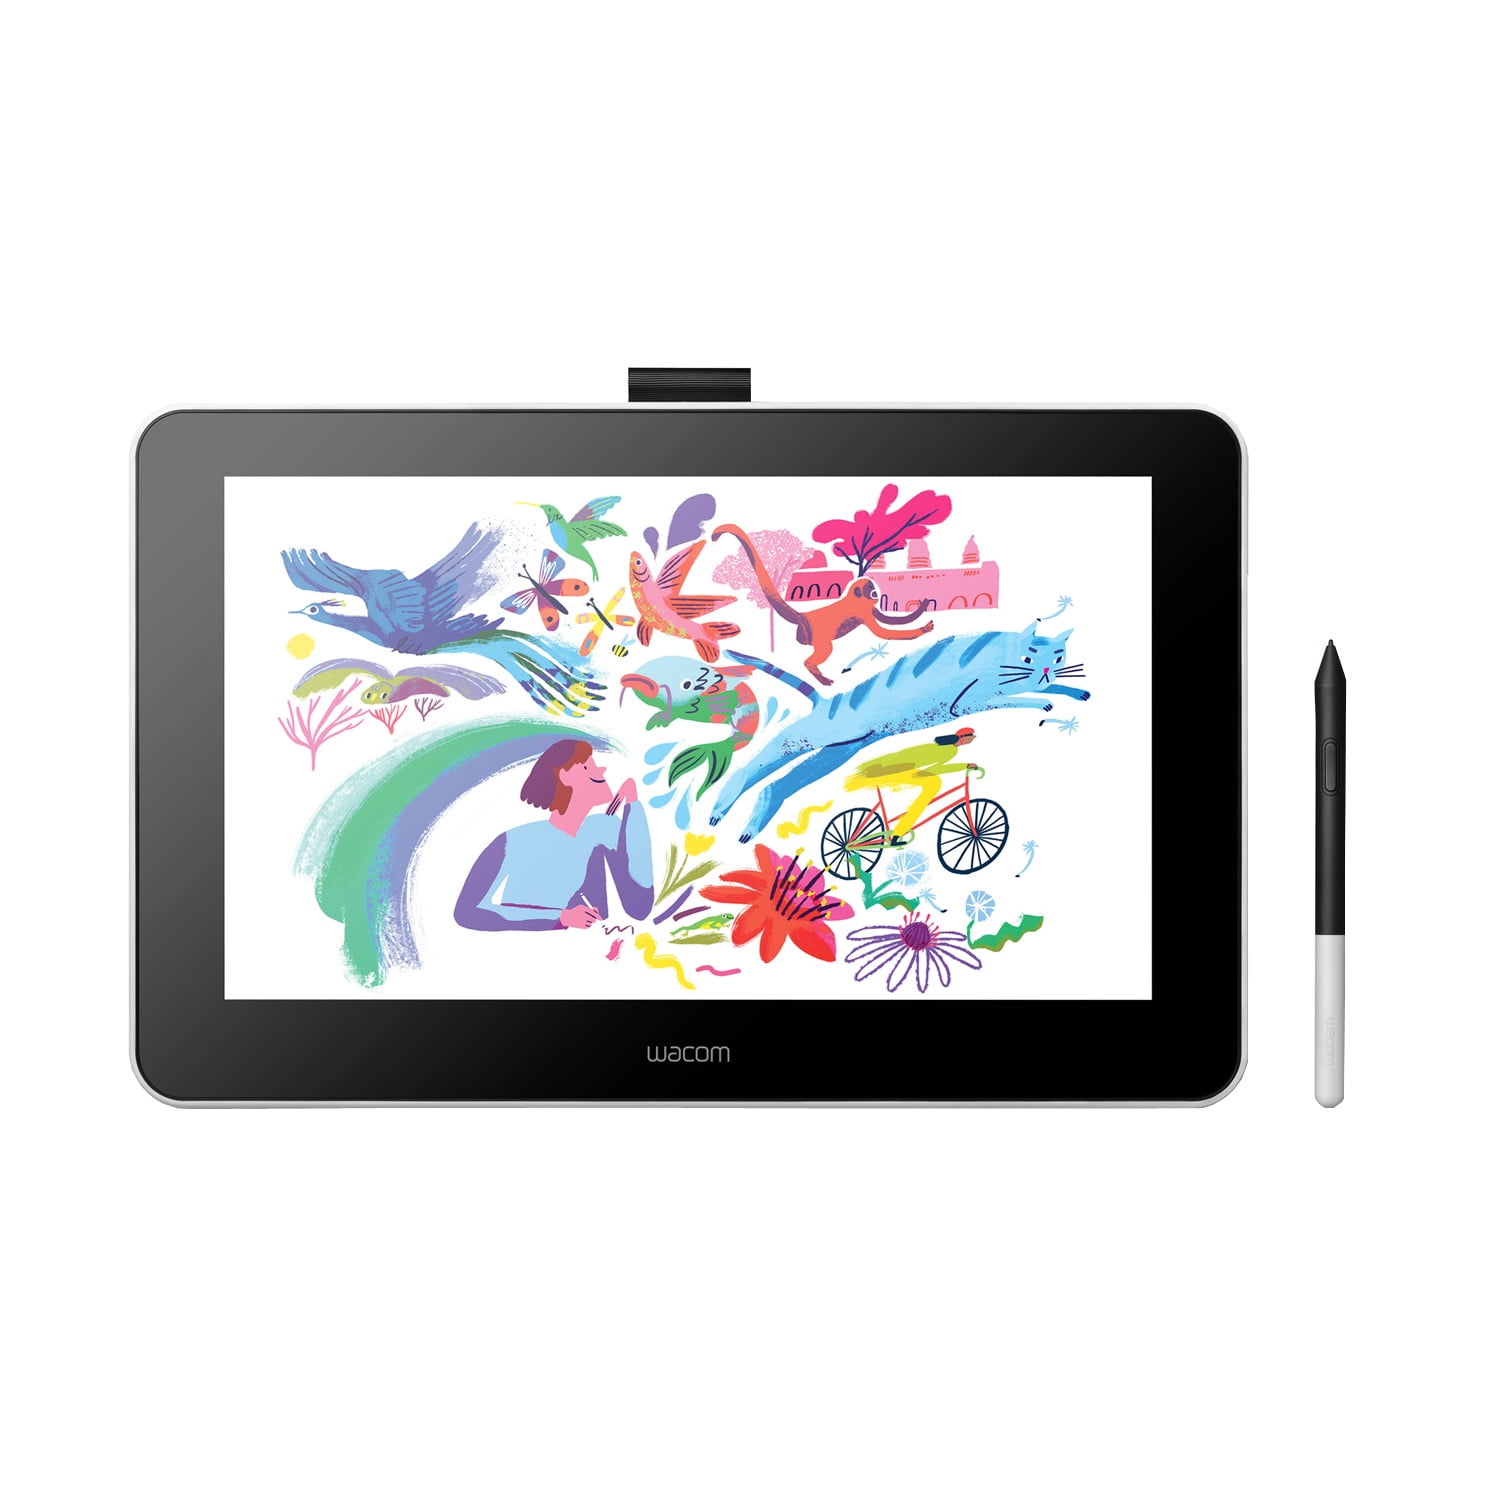 GAOMON PD2200 21.5'' Drawing Tablet with Screen for Professional Artists